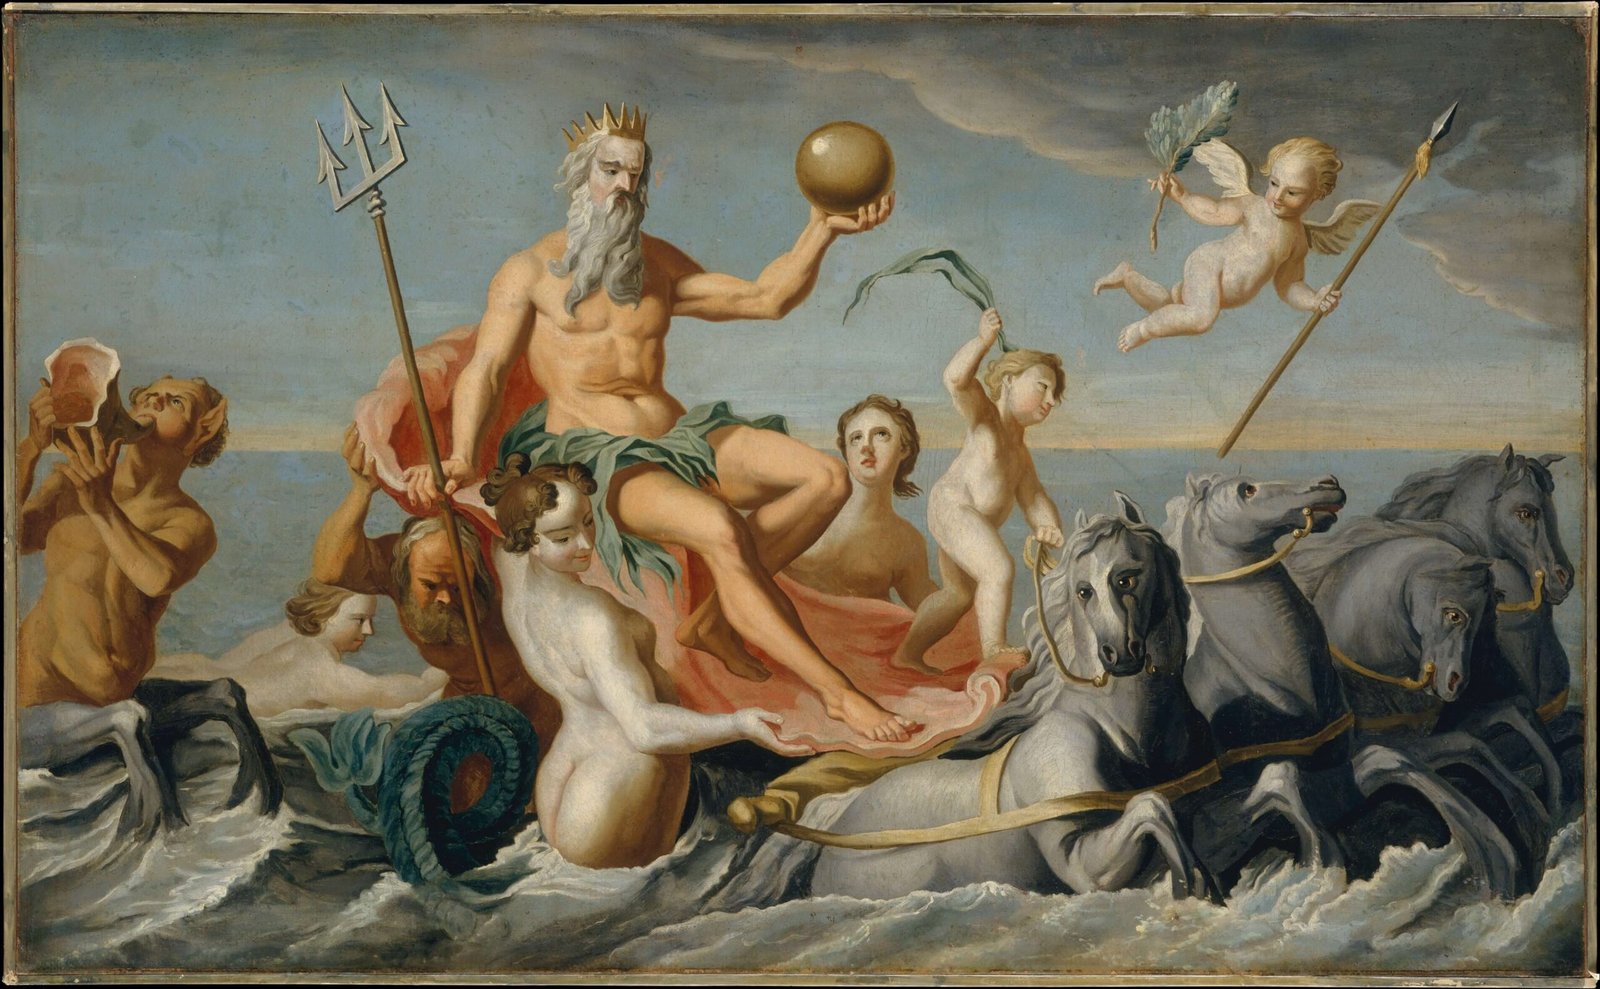 This painting represents Poseidon, sitting in his chariot and surrounded by water nymphs. He holds a golden globe.